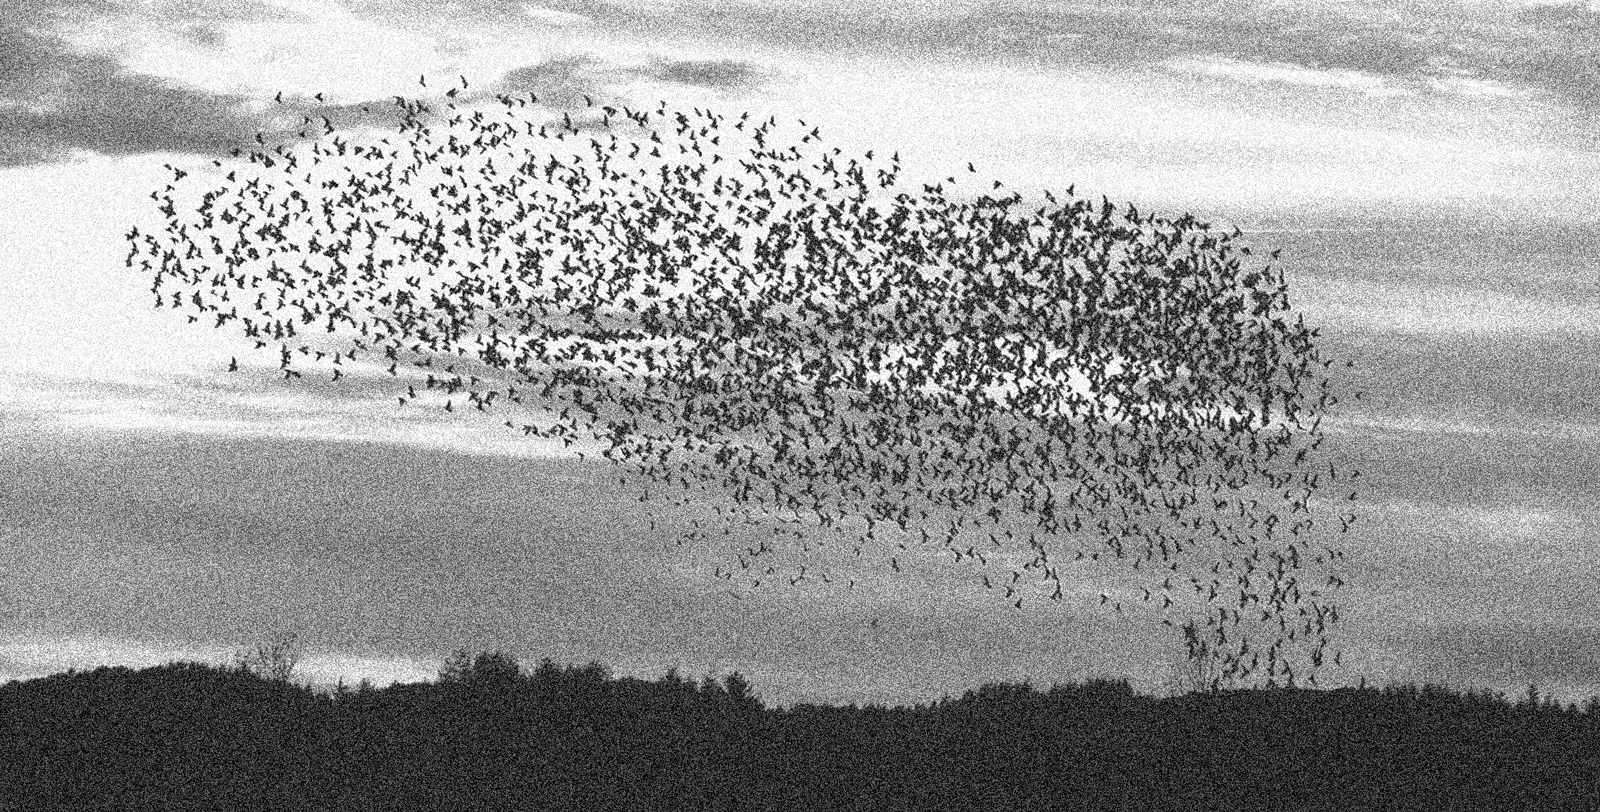 A grainy black-and-white image of a flock of birds against a cloudy sky,